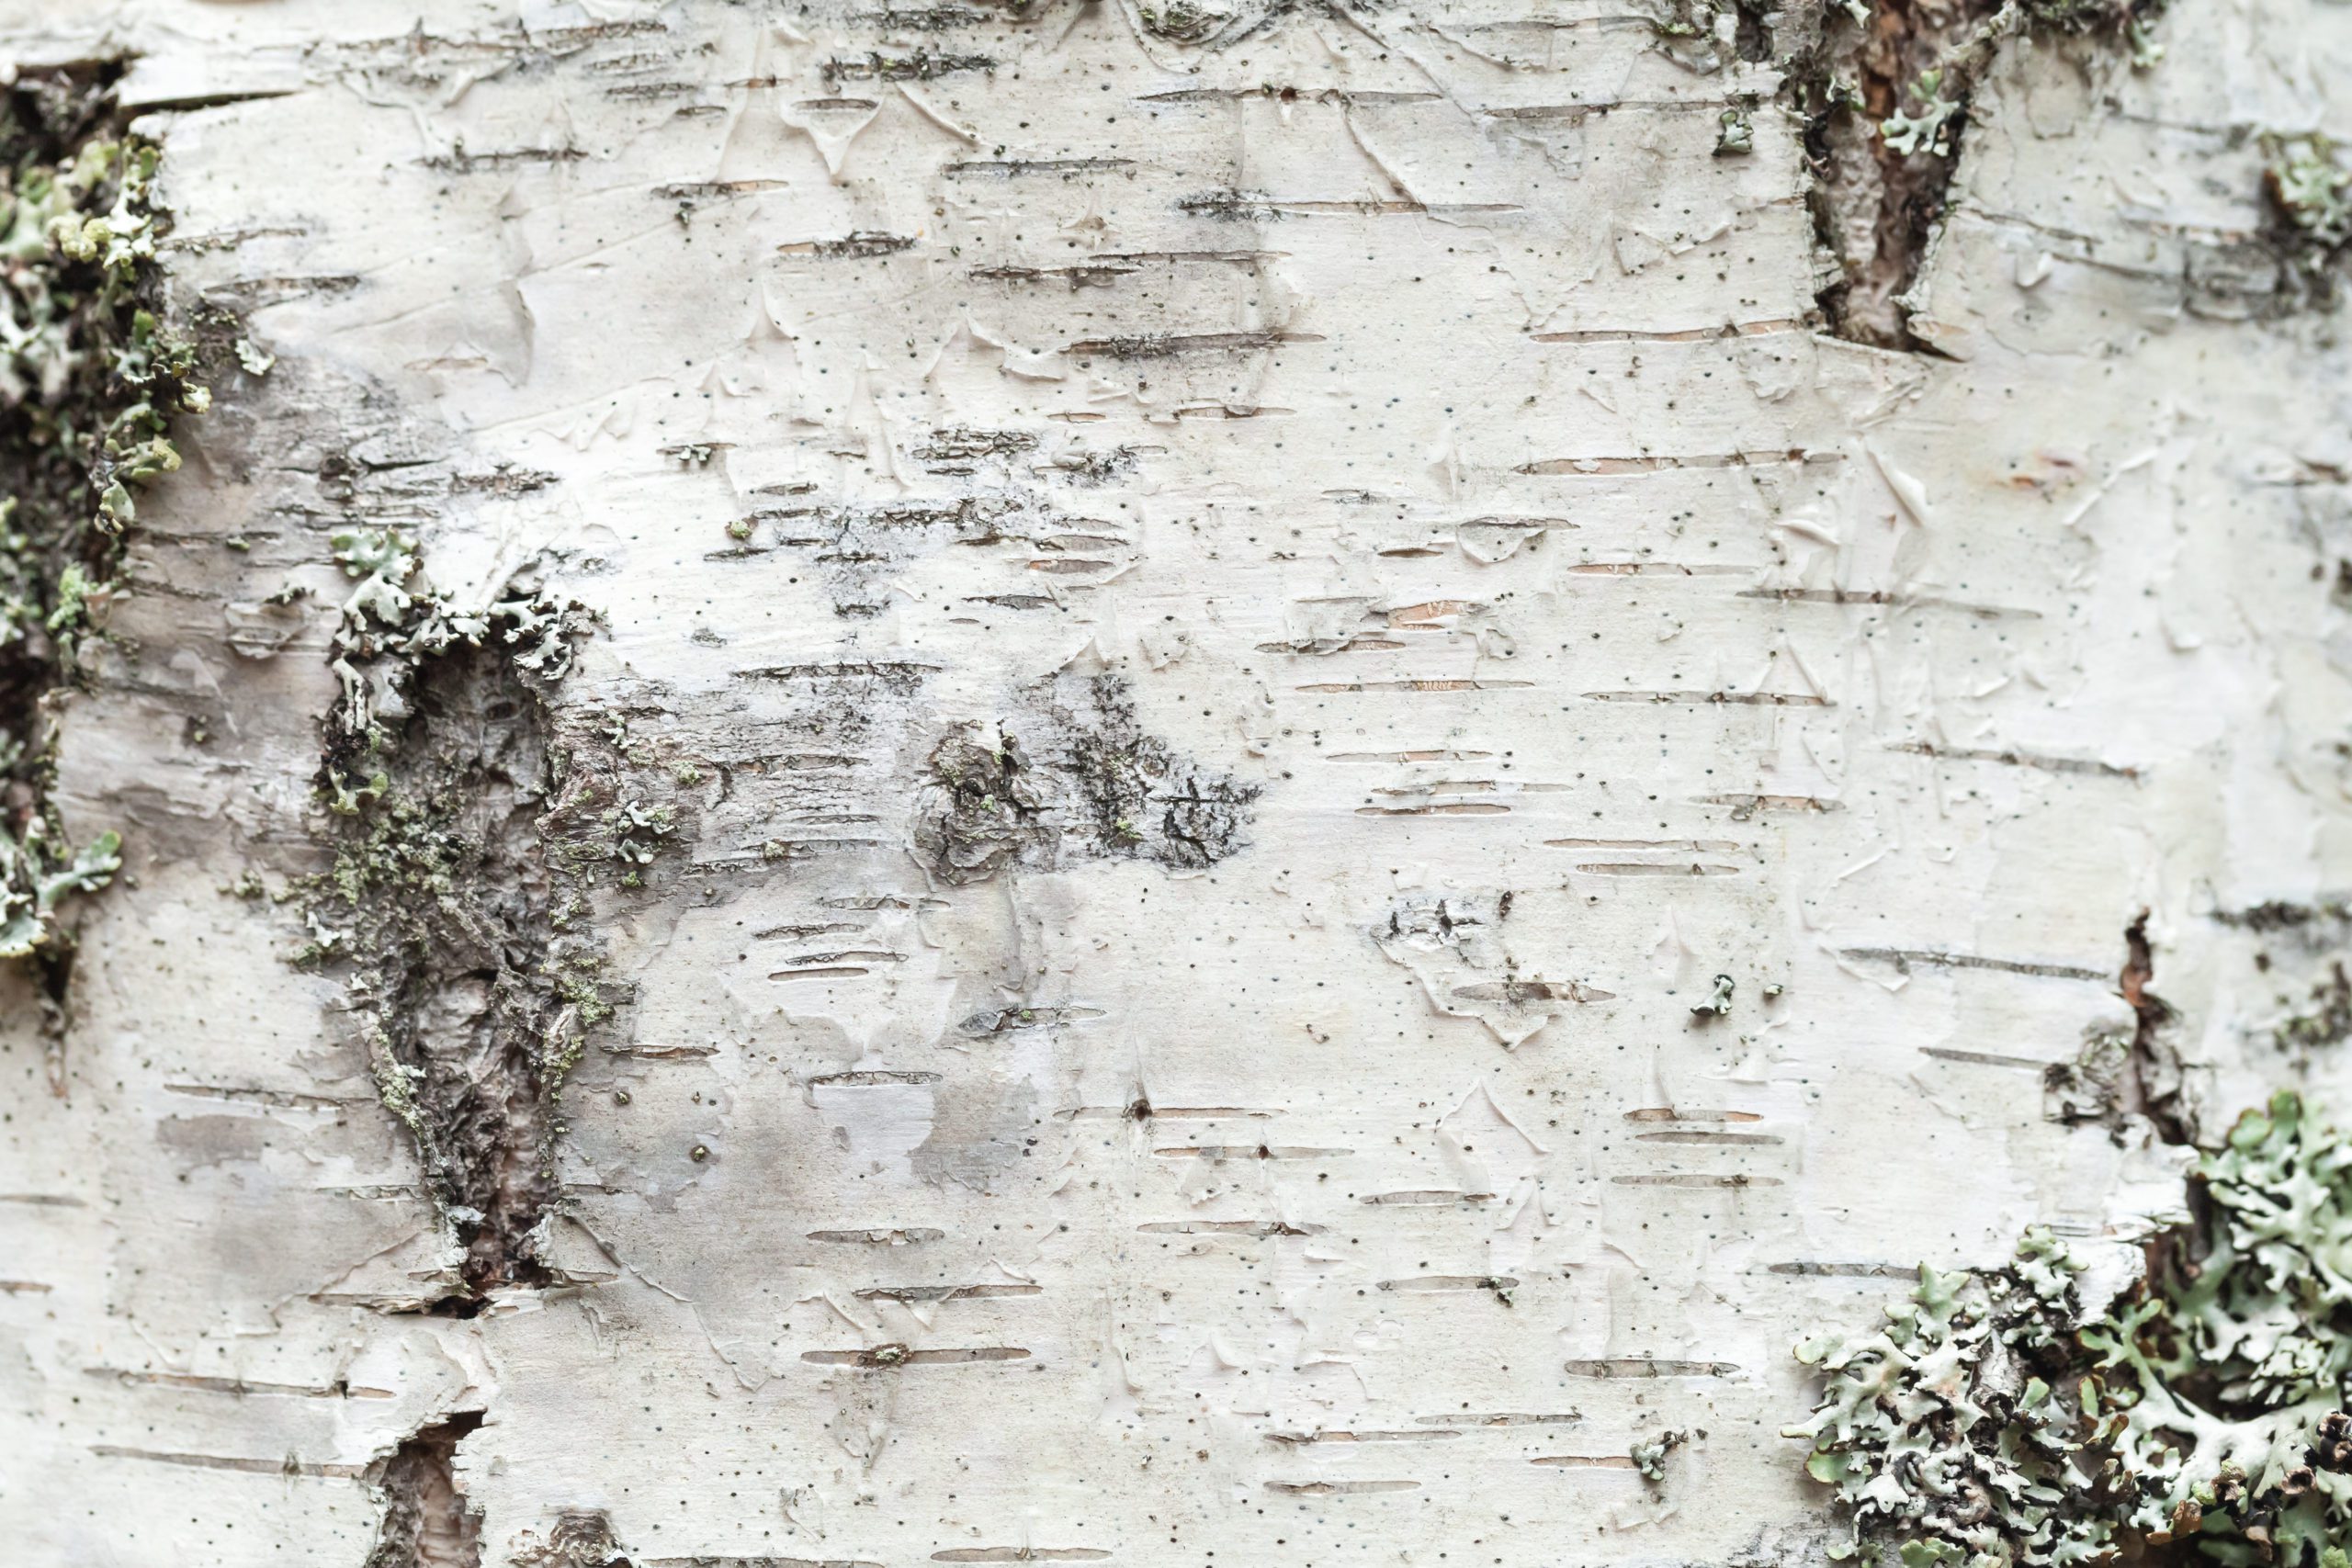 White birch tree bark with lichen growing on it. Close-up natural background texture